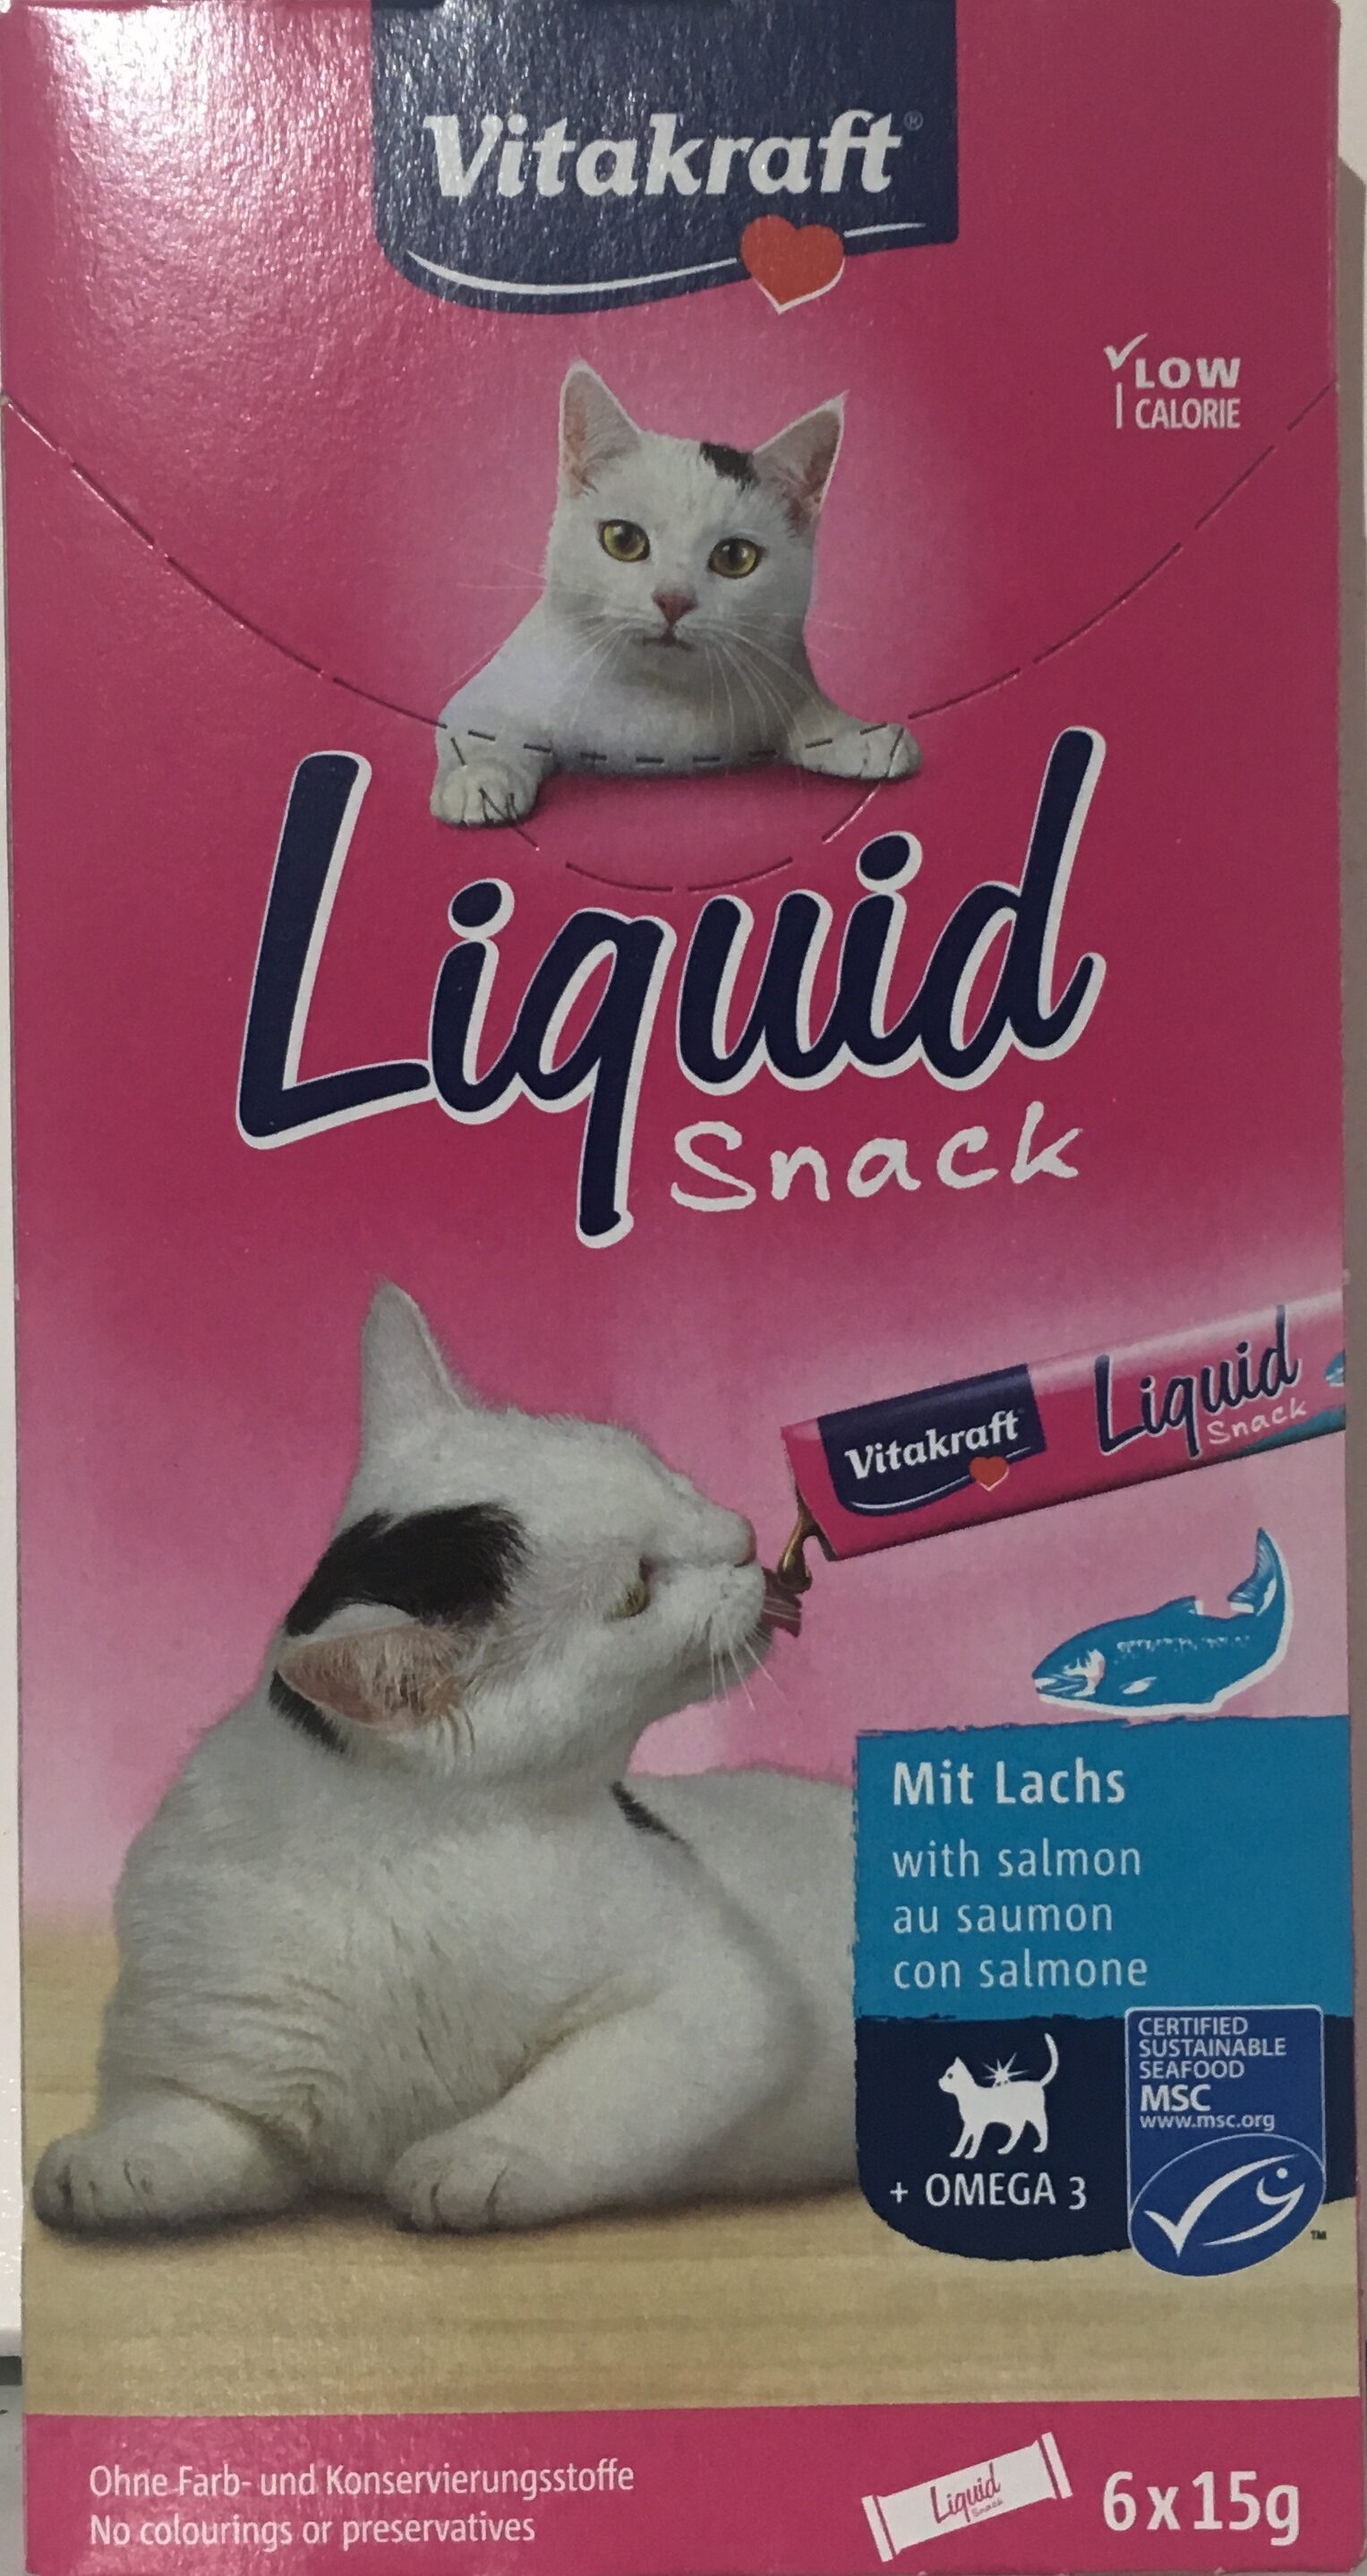 Liquid Snack with Salmon - Product - en